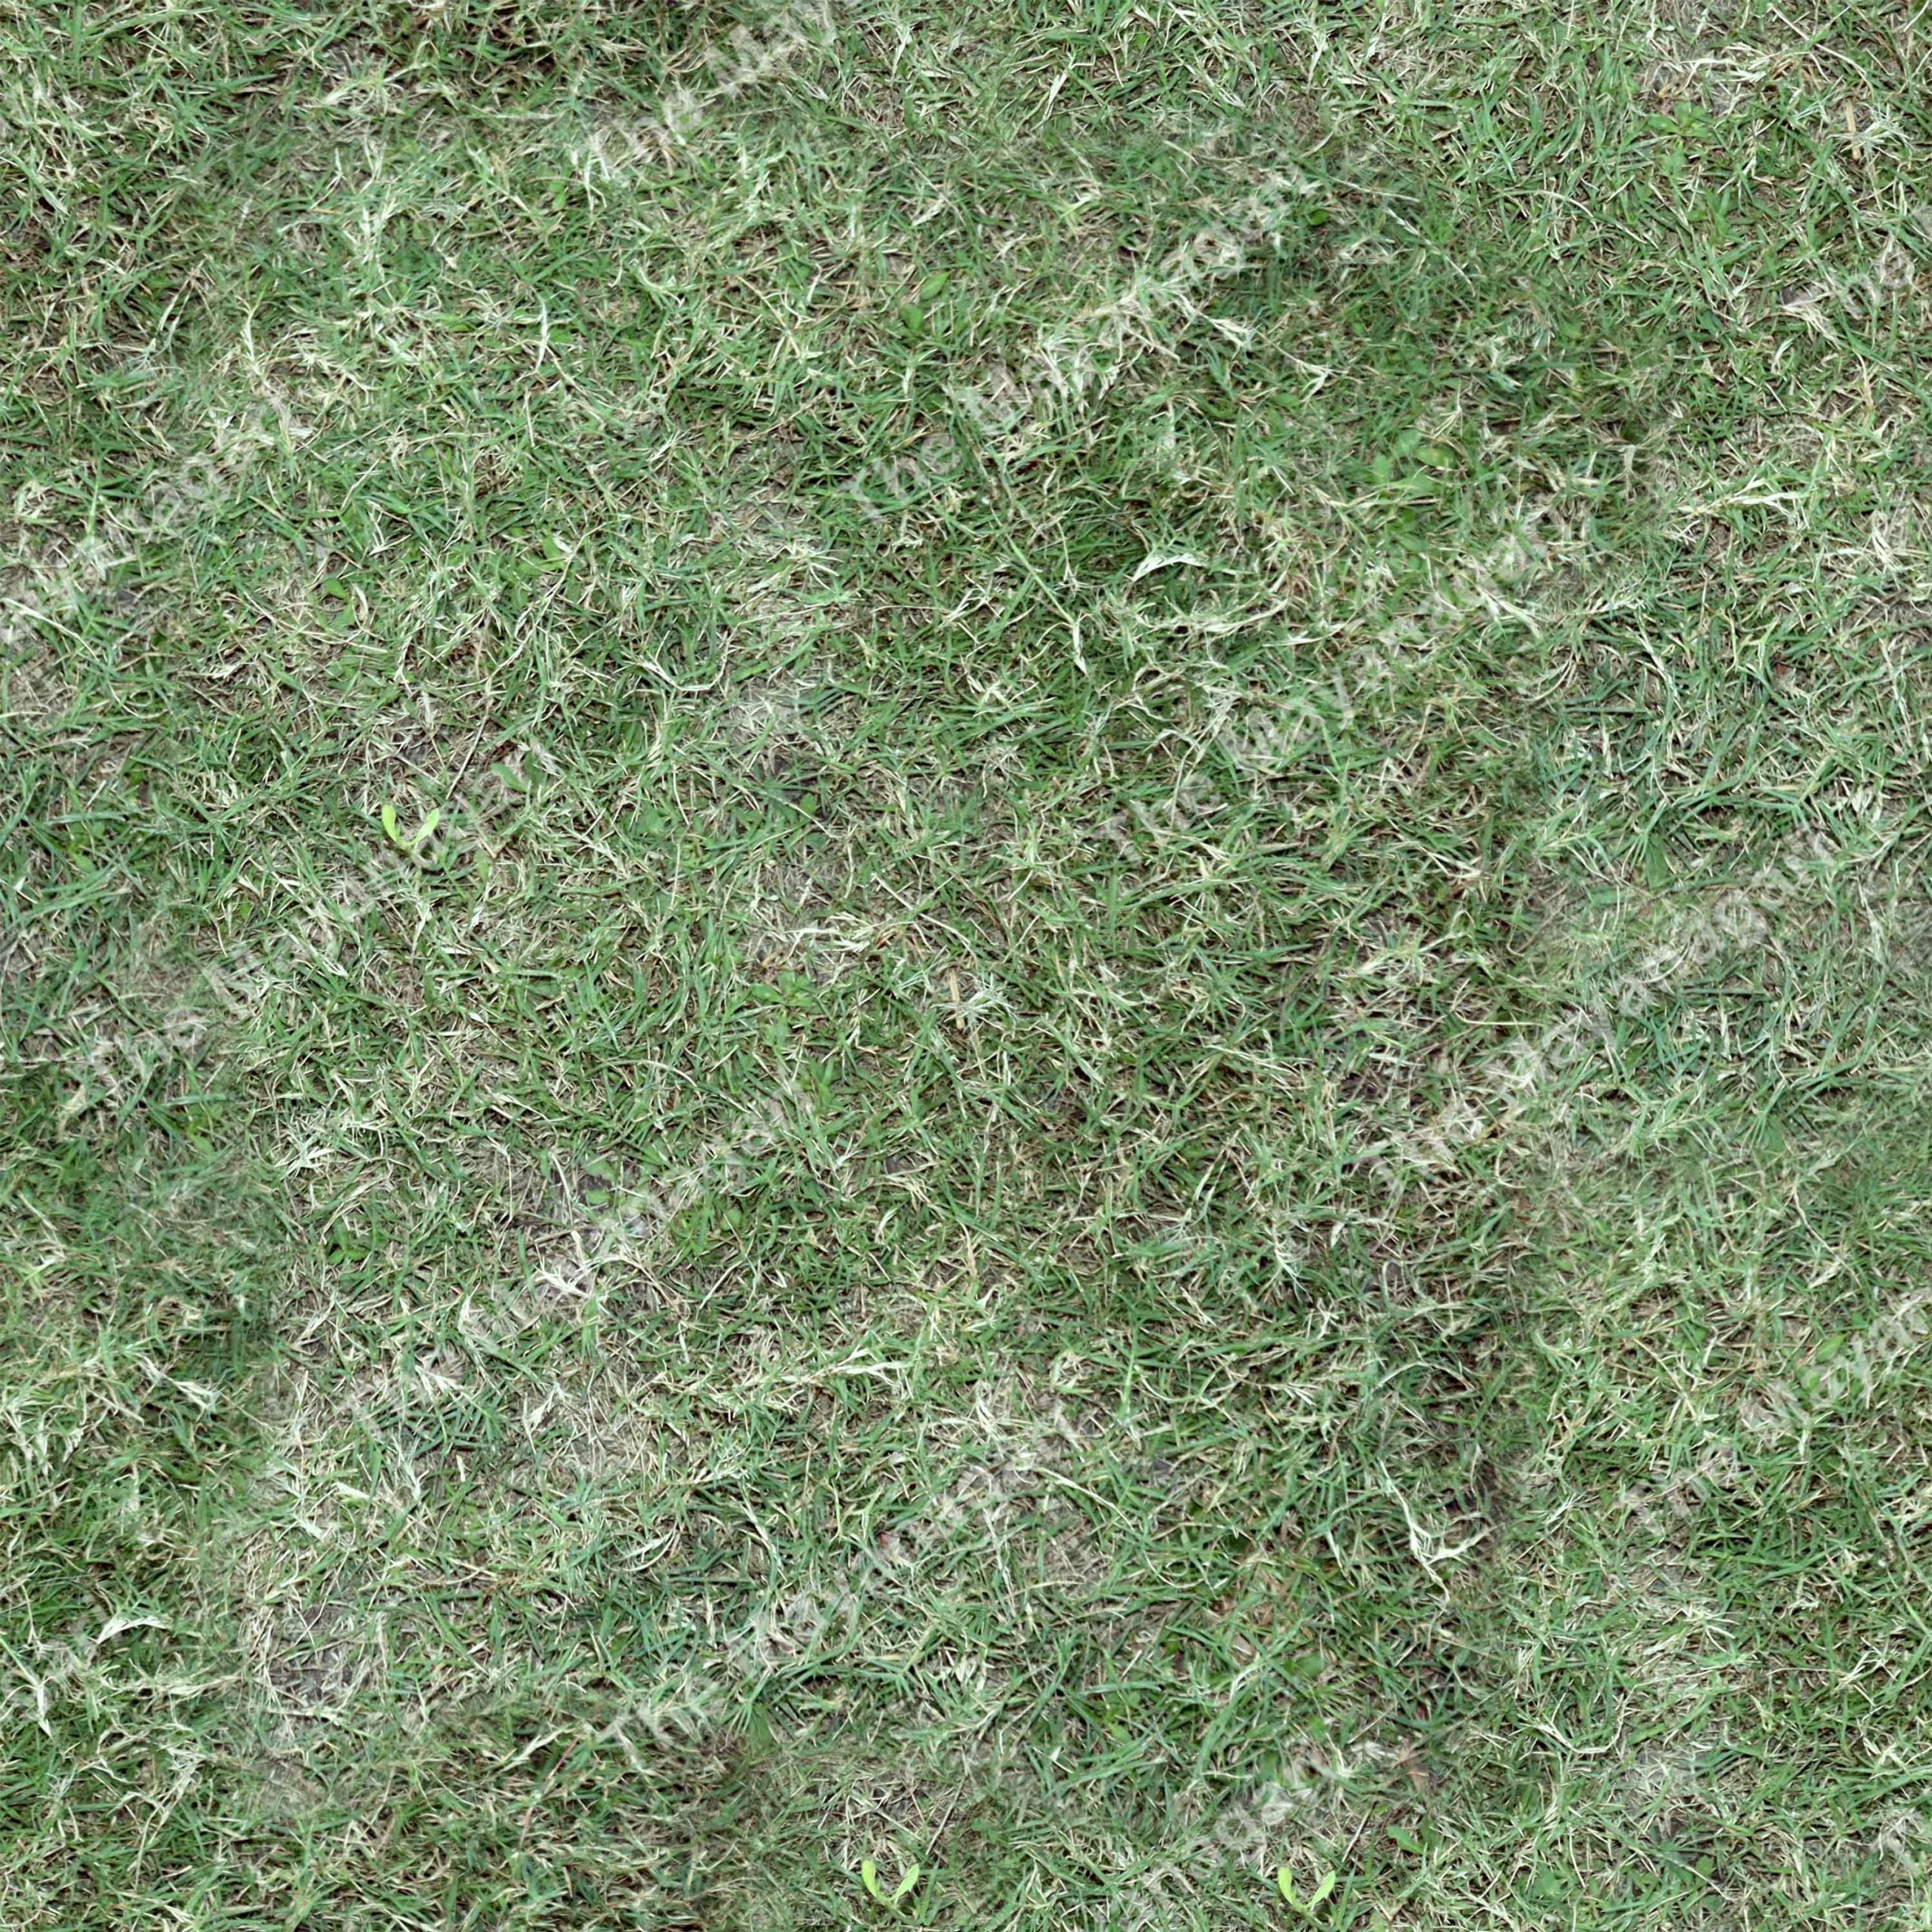 4k Grass Seamless Texture Download Image Free Download 